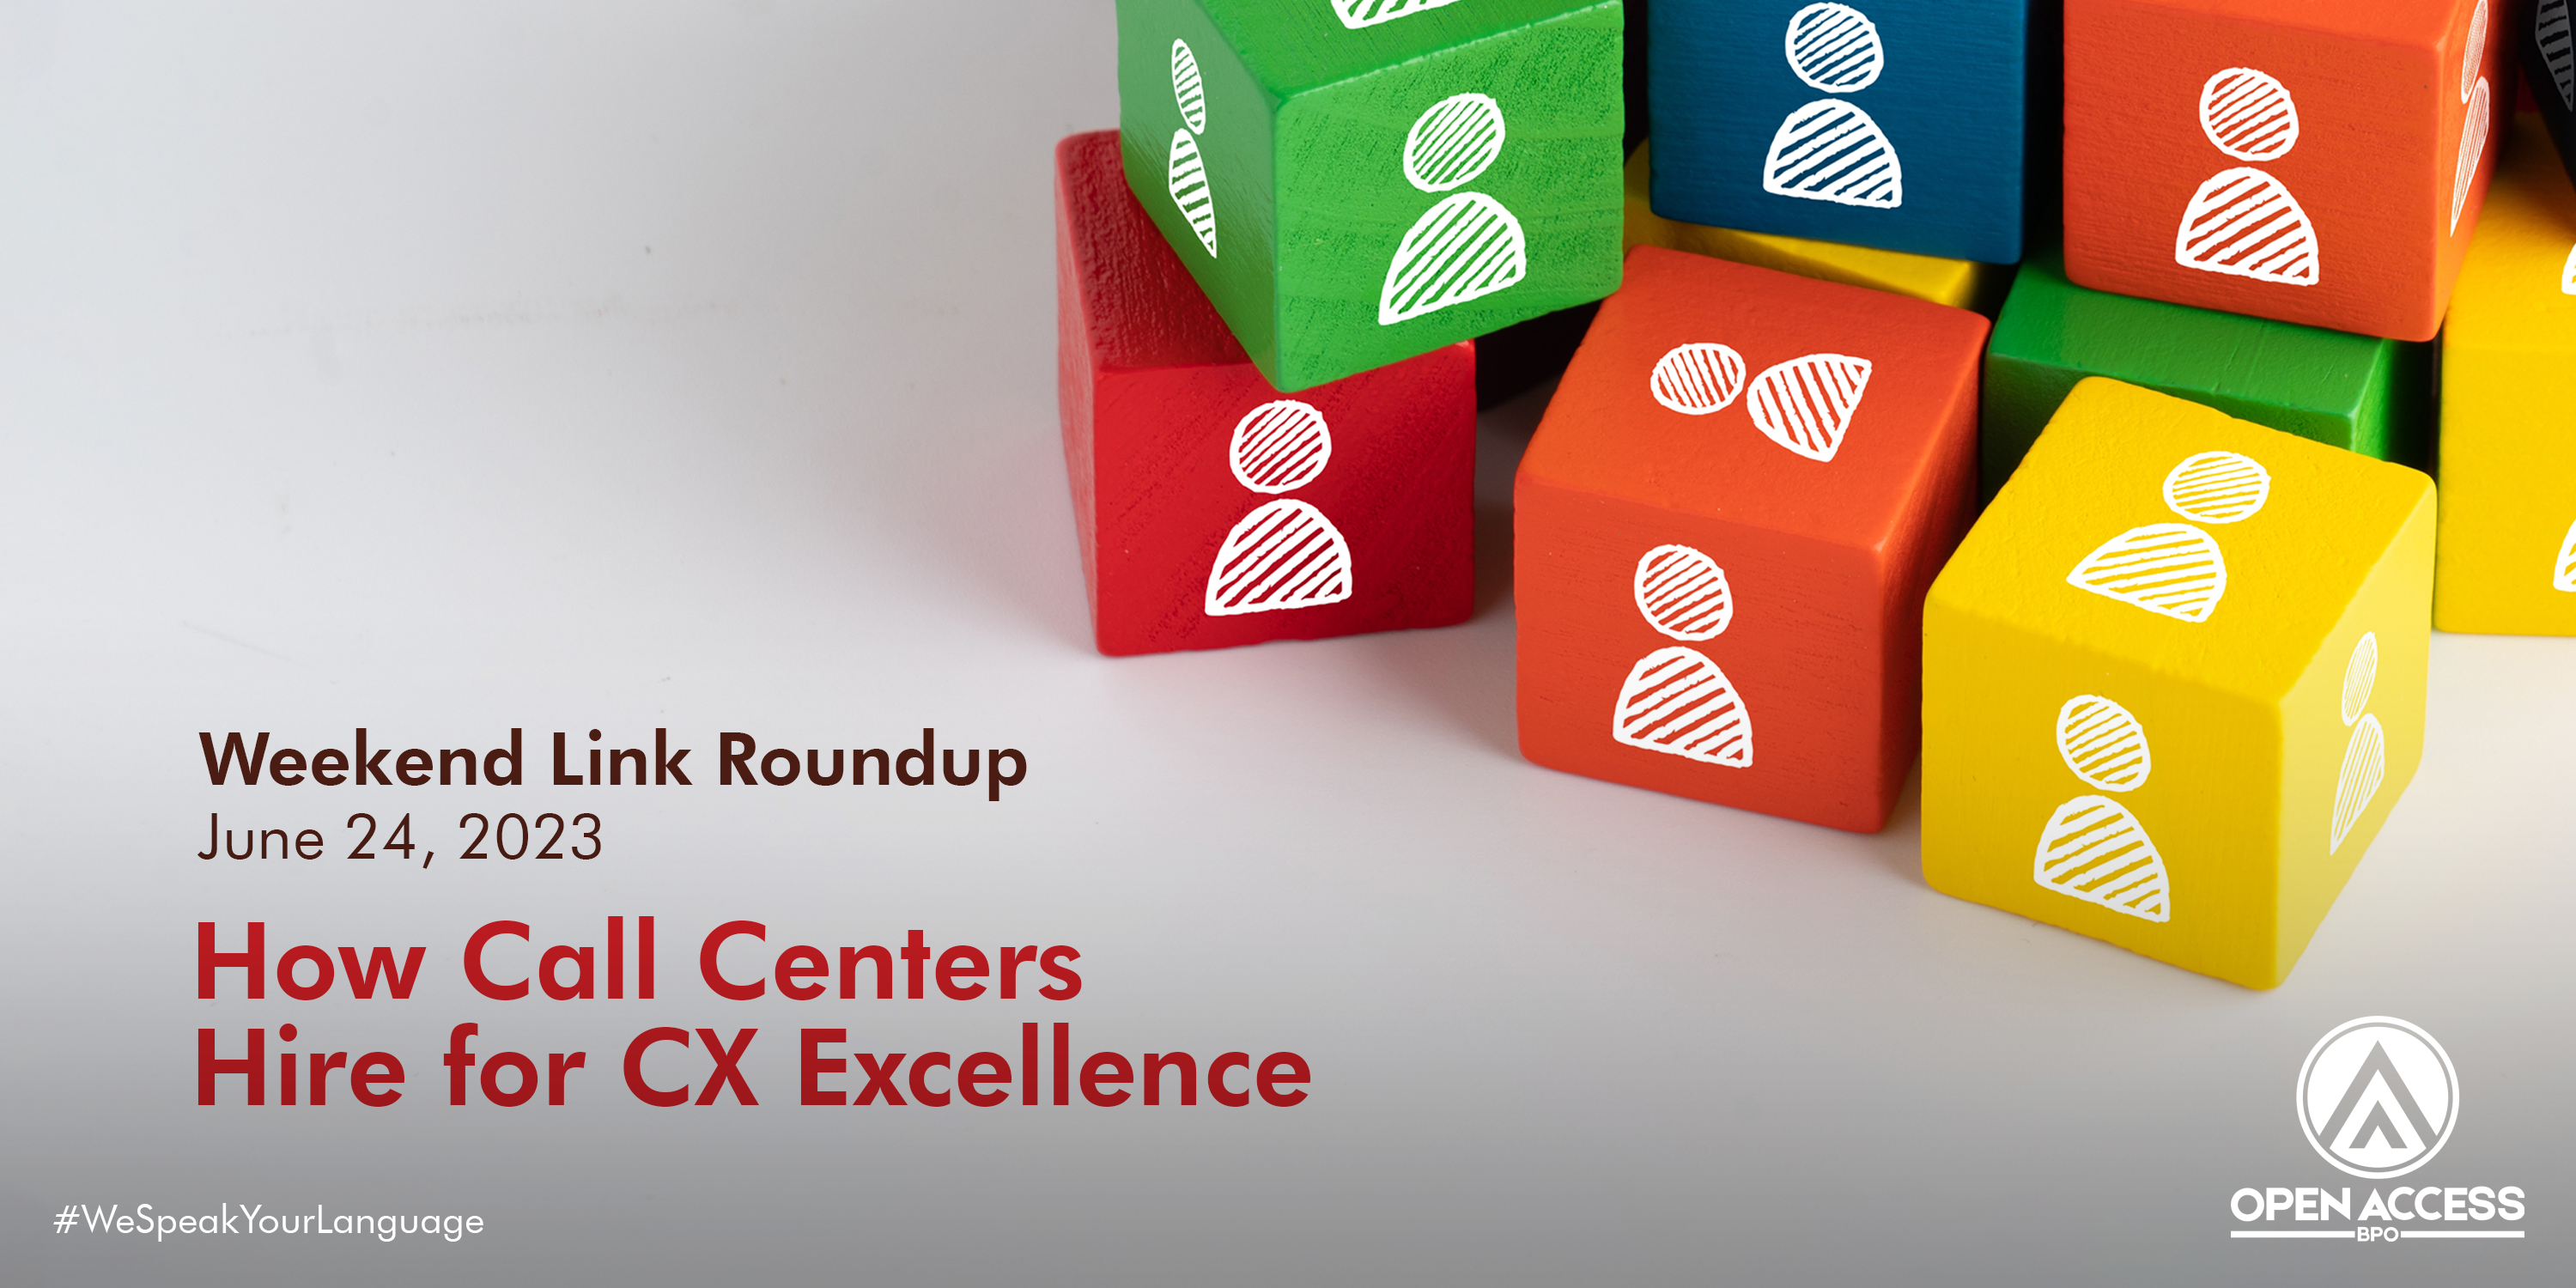 Open Access BPO Link Roundup How Call Centers Hire for CX Excellence